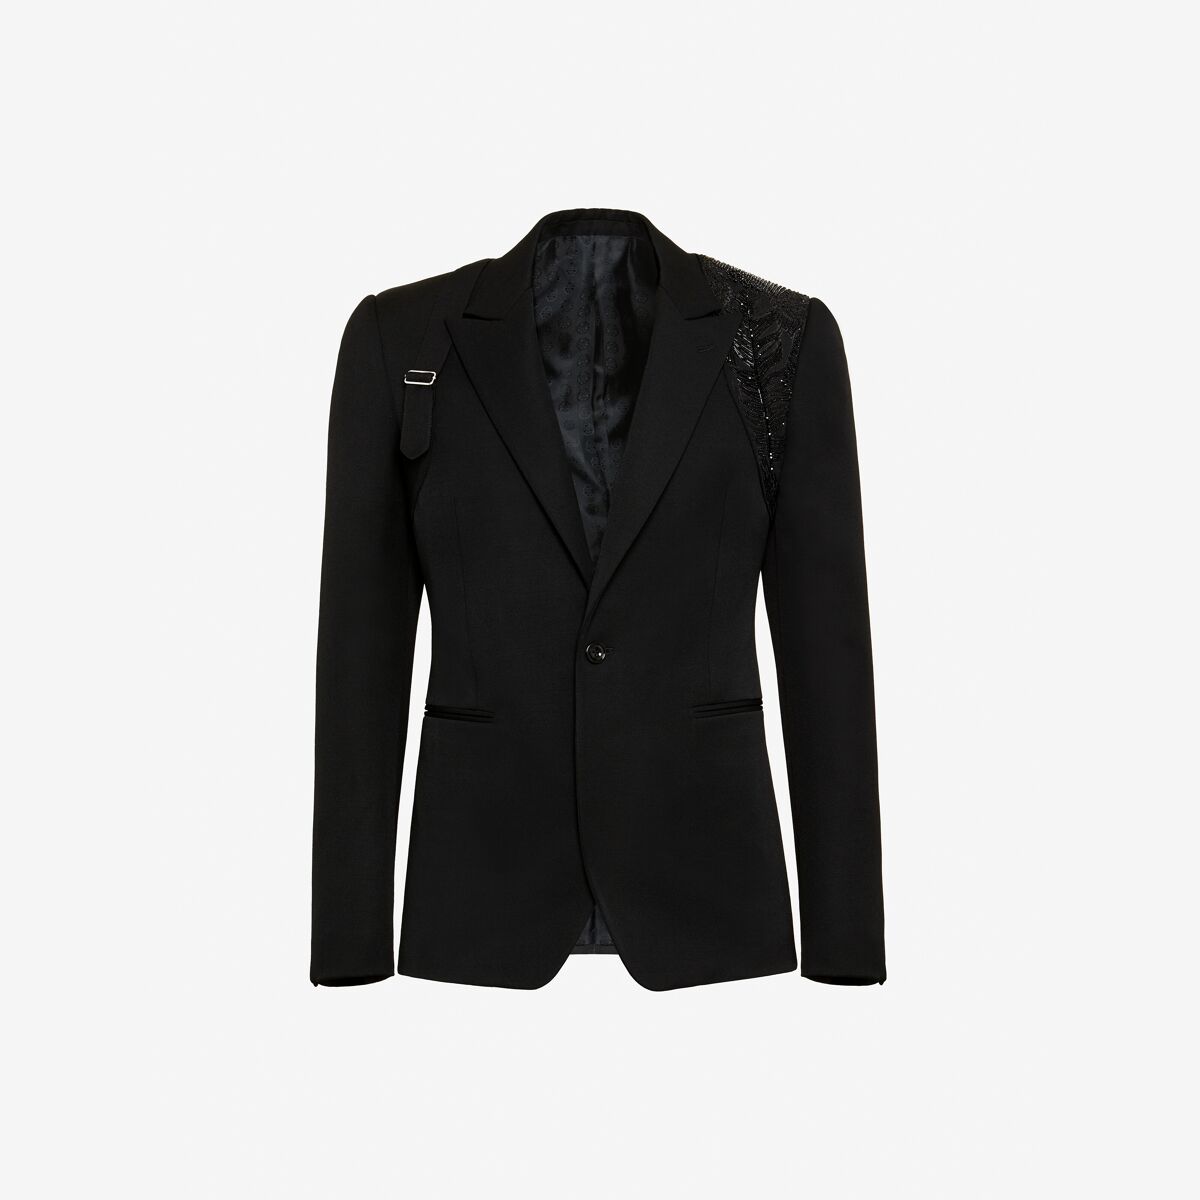 ALEXANDER MCQUEEN EMBROIDERED HARNESS SINGLE-BREASTED JACKET